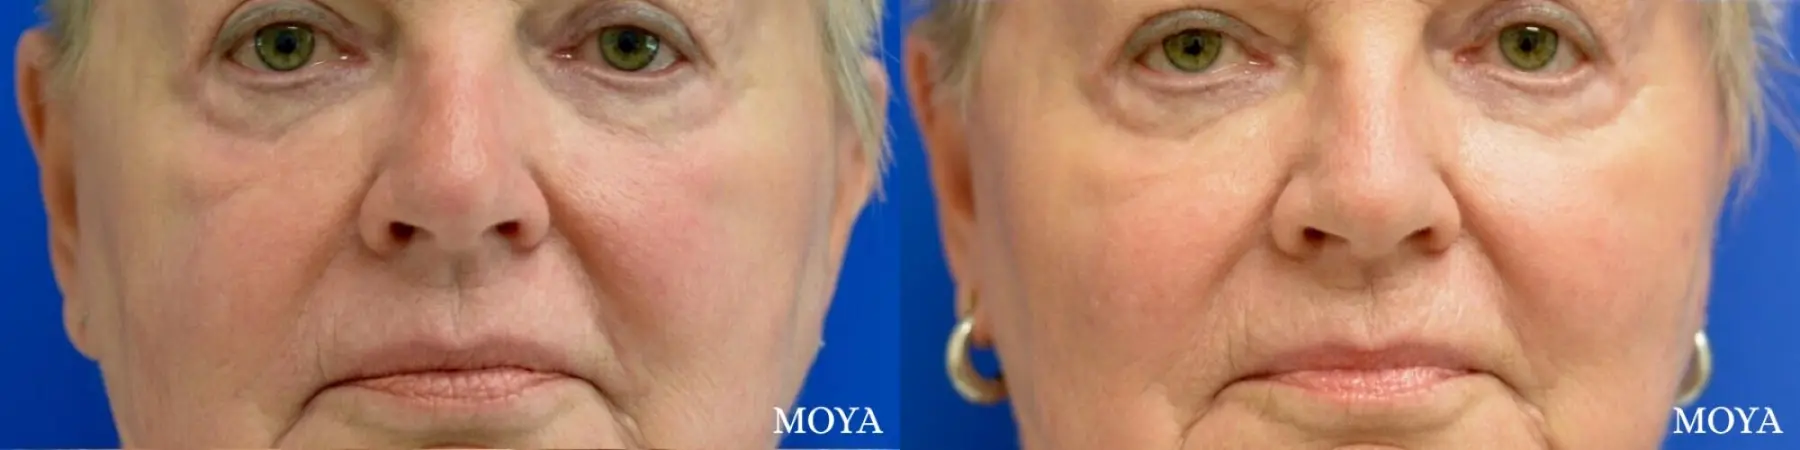 Fillers: Patient 8 - Before and After 1